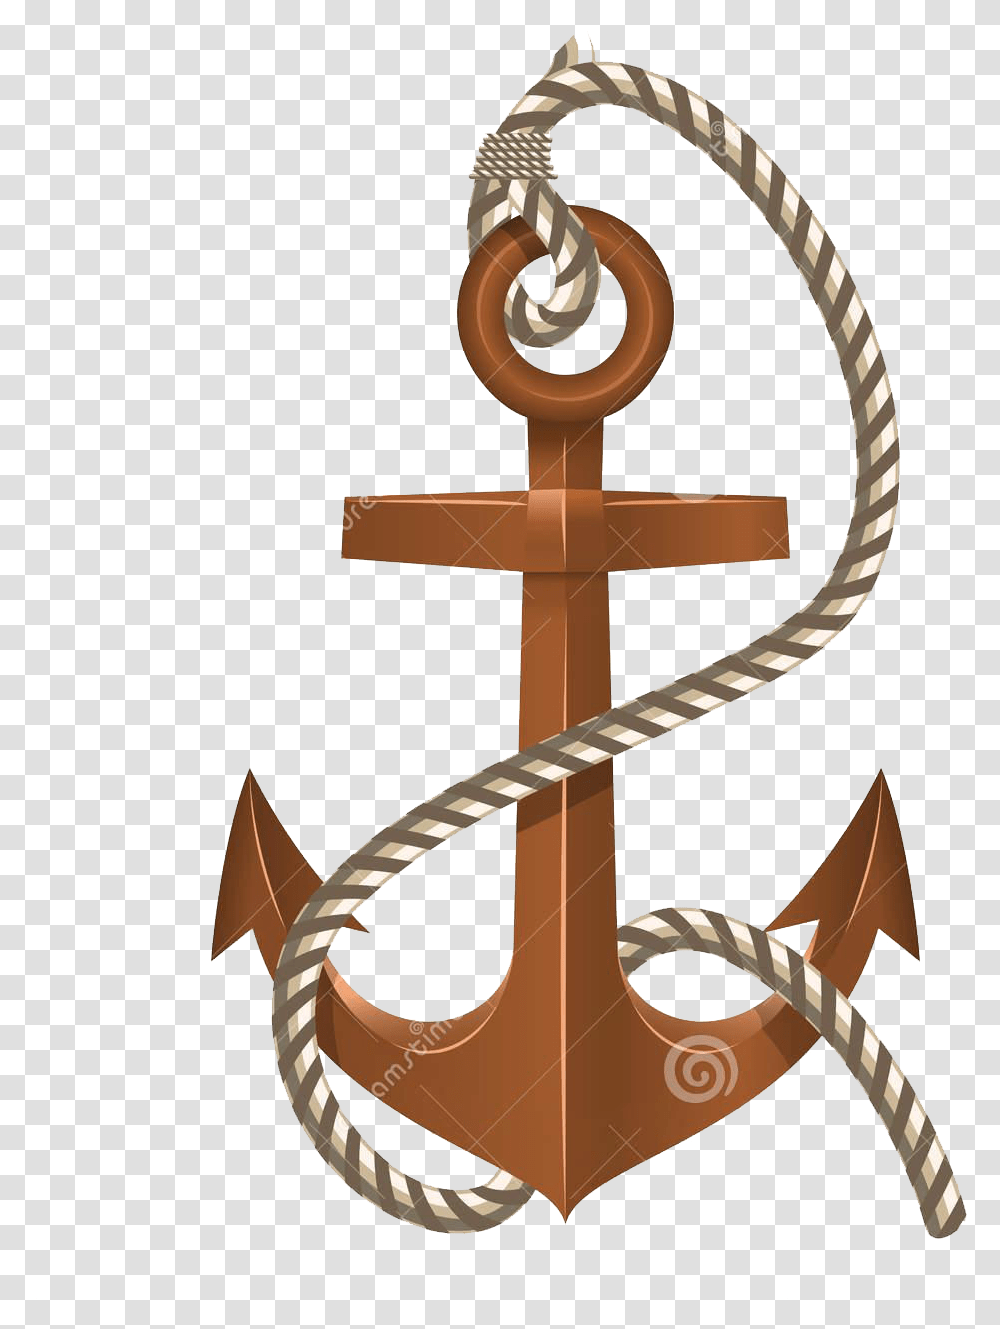 Anchor Clip Rope Anchor With Rope, Hook, Cross Transparent Png